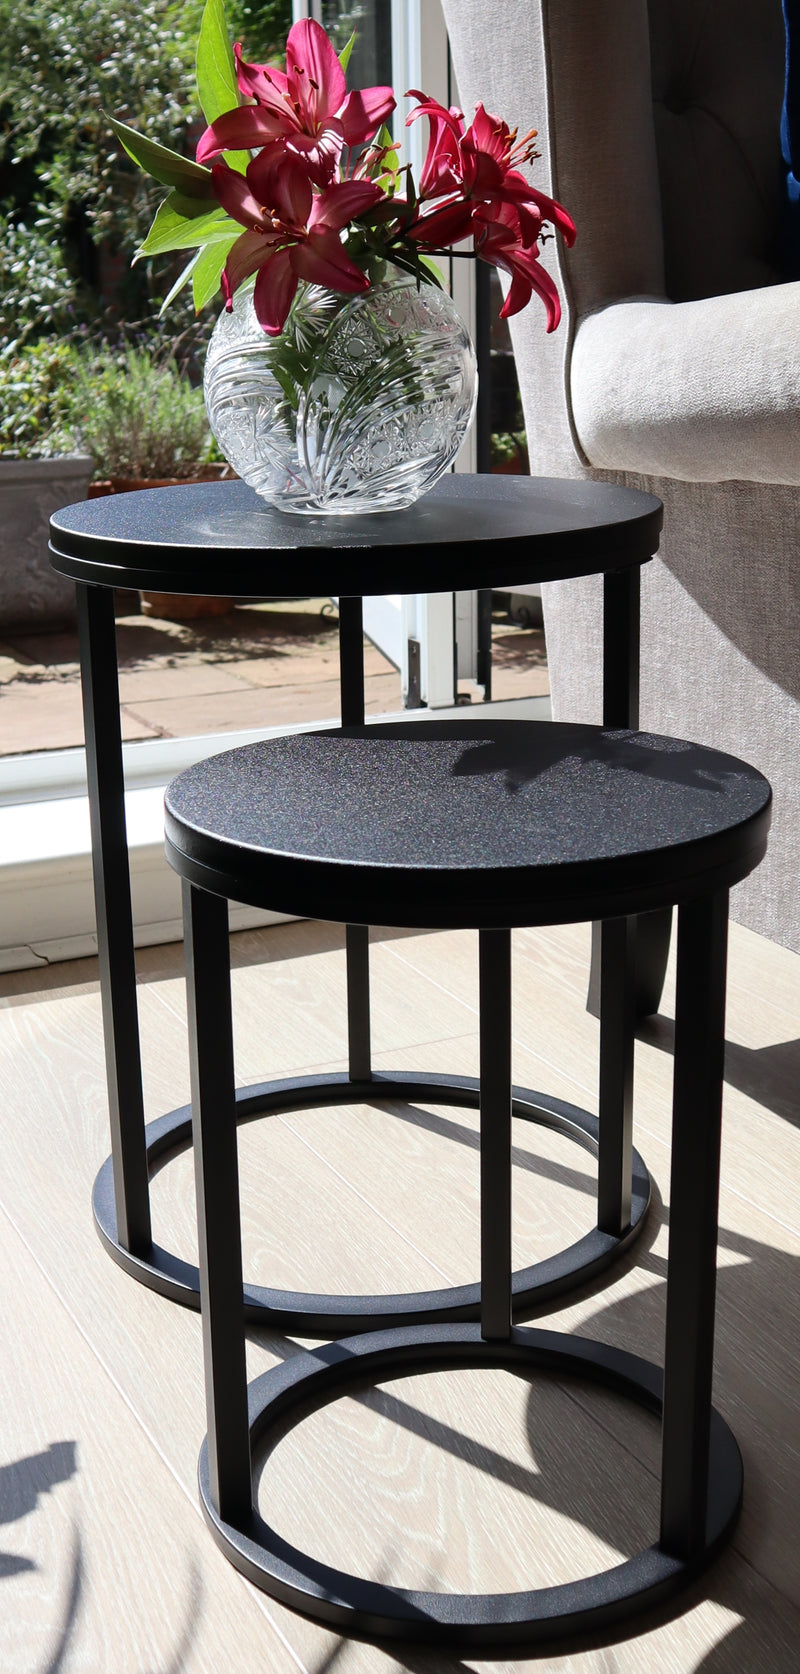 Paloma Set of 2 Round Nesting Tables, Matte Black Top and Base (7631914336468)